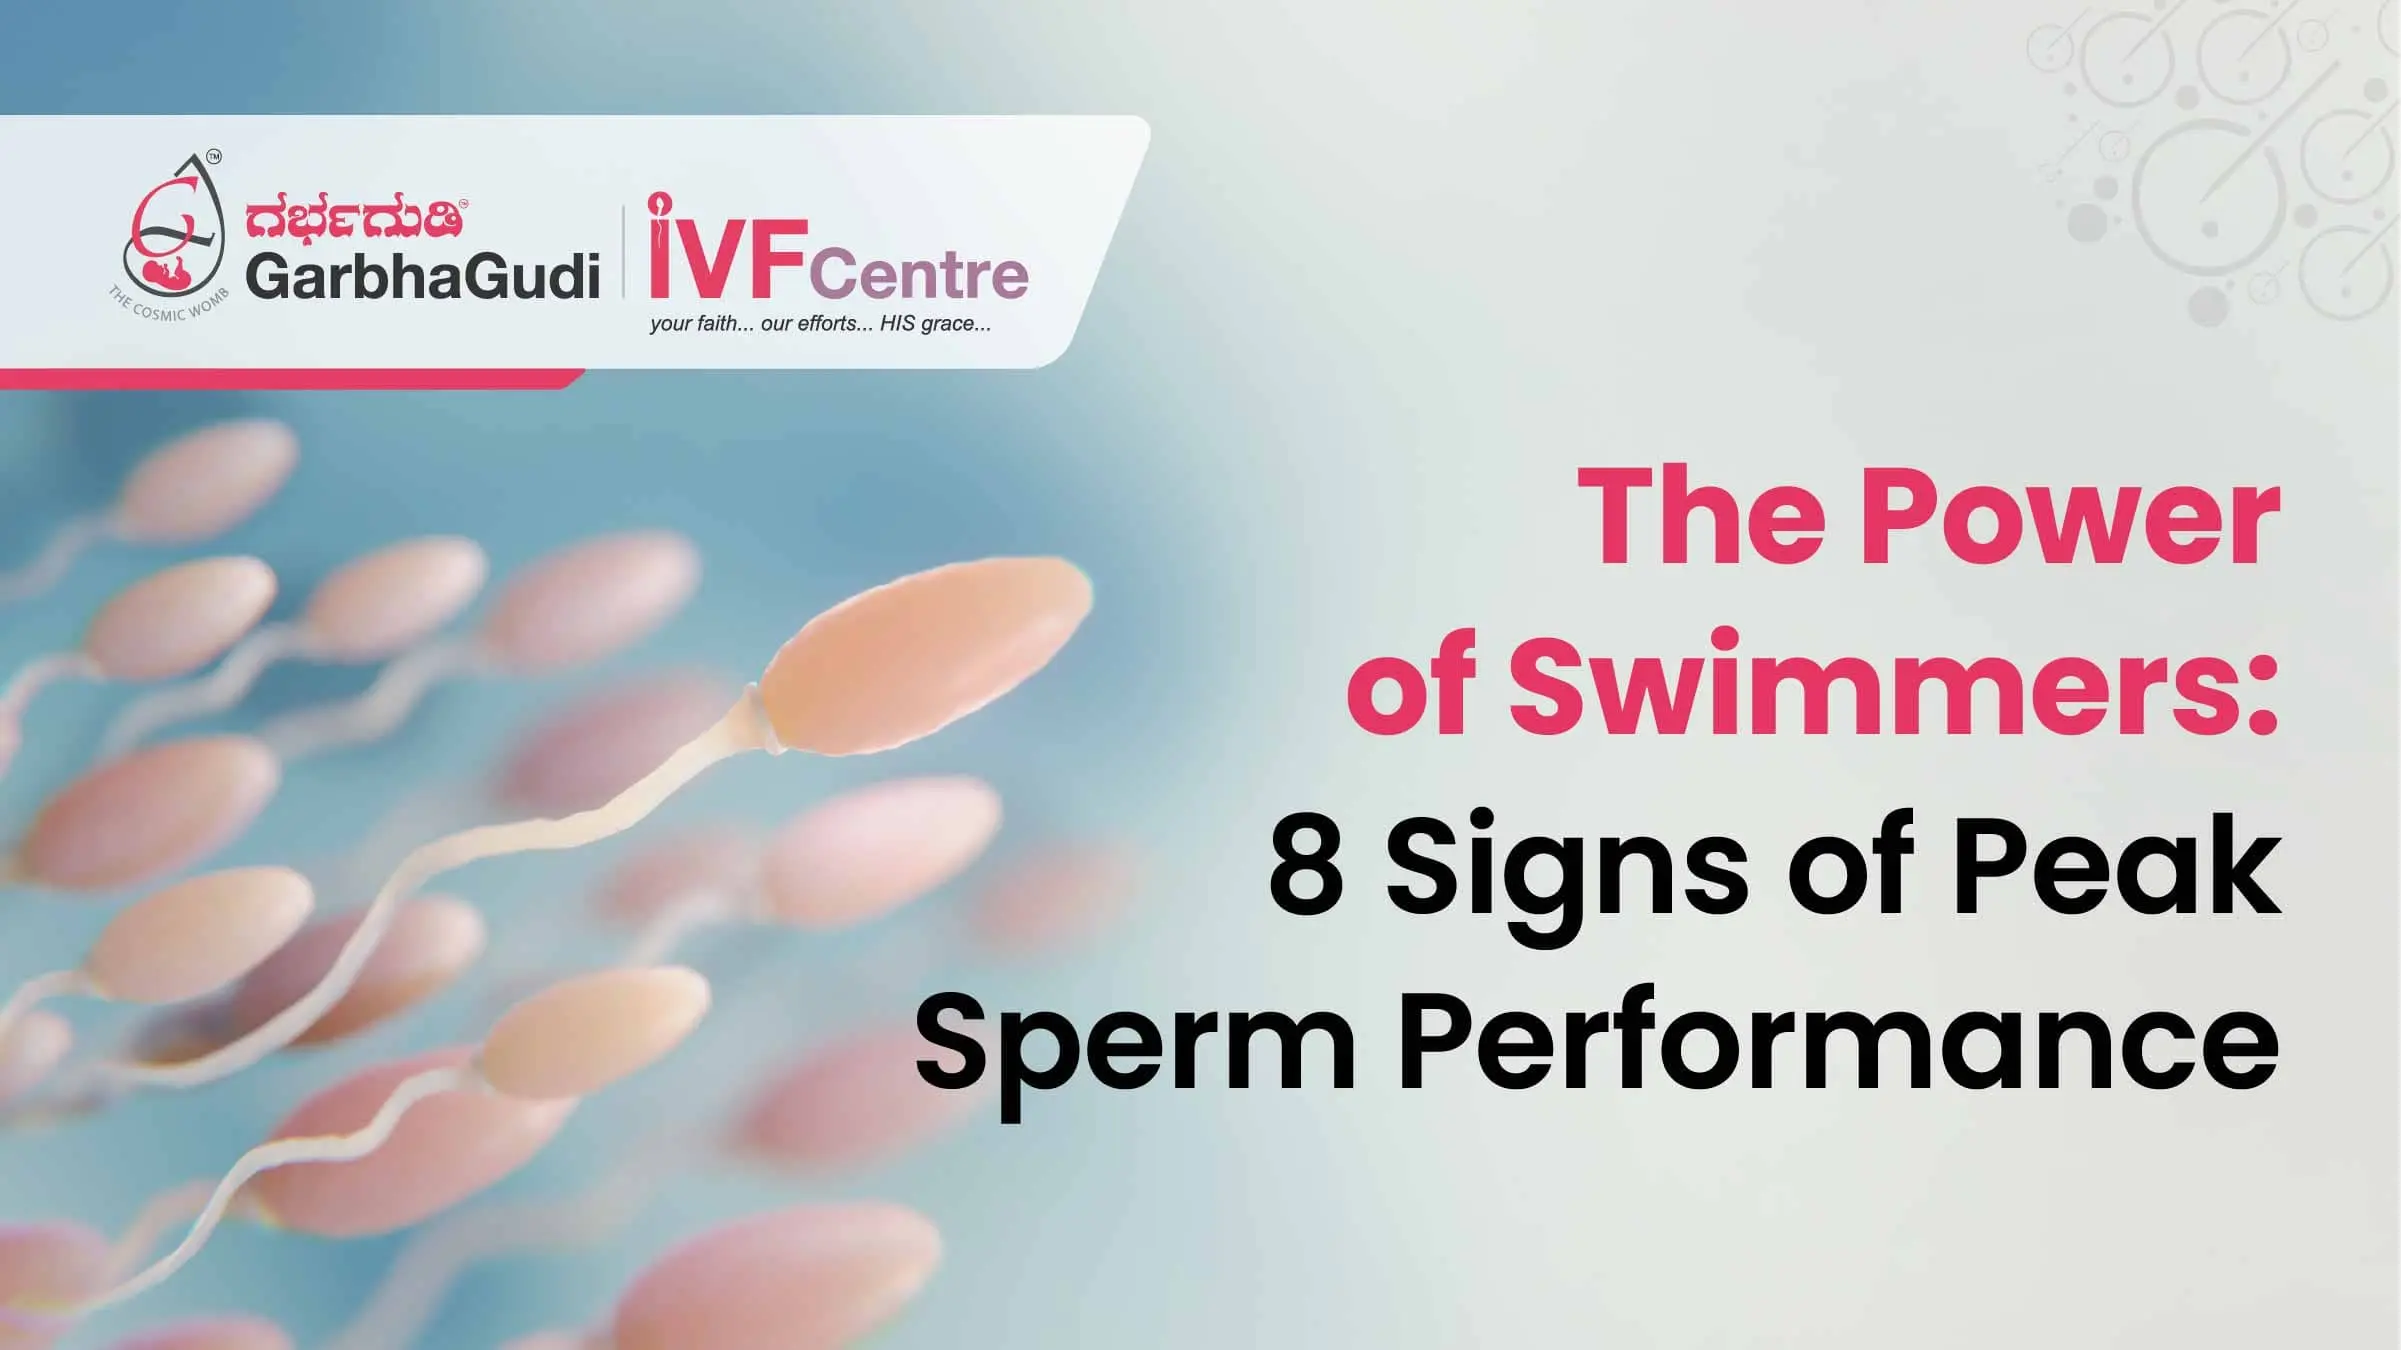 The Power of Swimmers: 8 Signs of Peak Sperm Performance